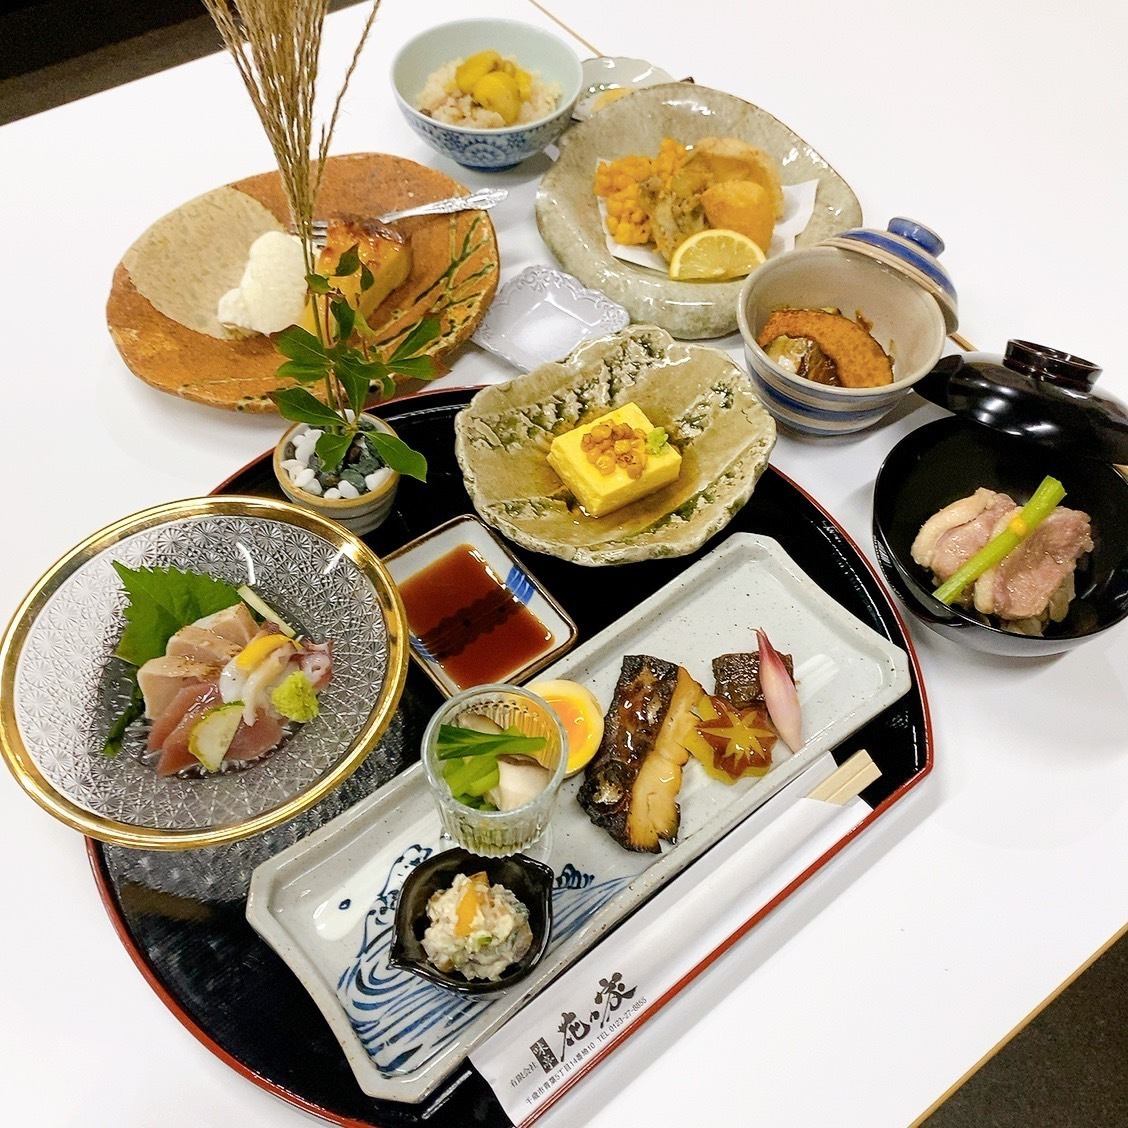 Enjoy all the Japanese cuisine you want, including seafood, meat, and fried foods.